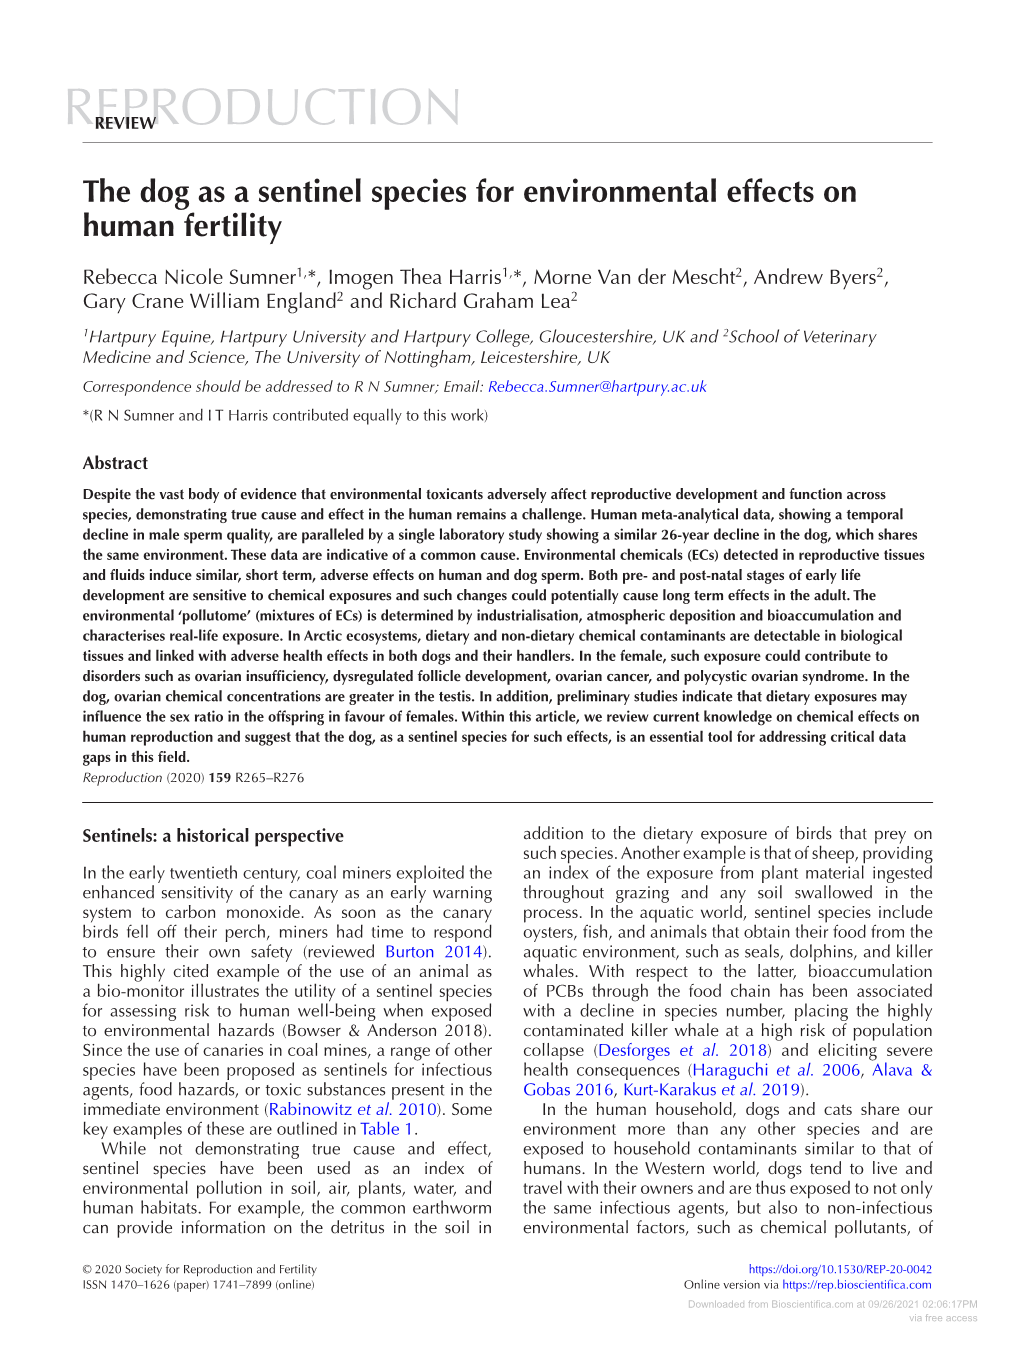 The Dog As a Sentinel Species for Environmental Effects on Human Fertility